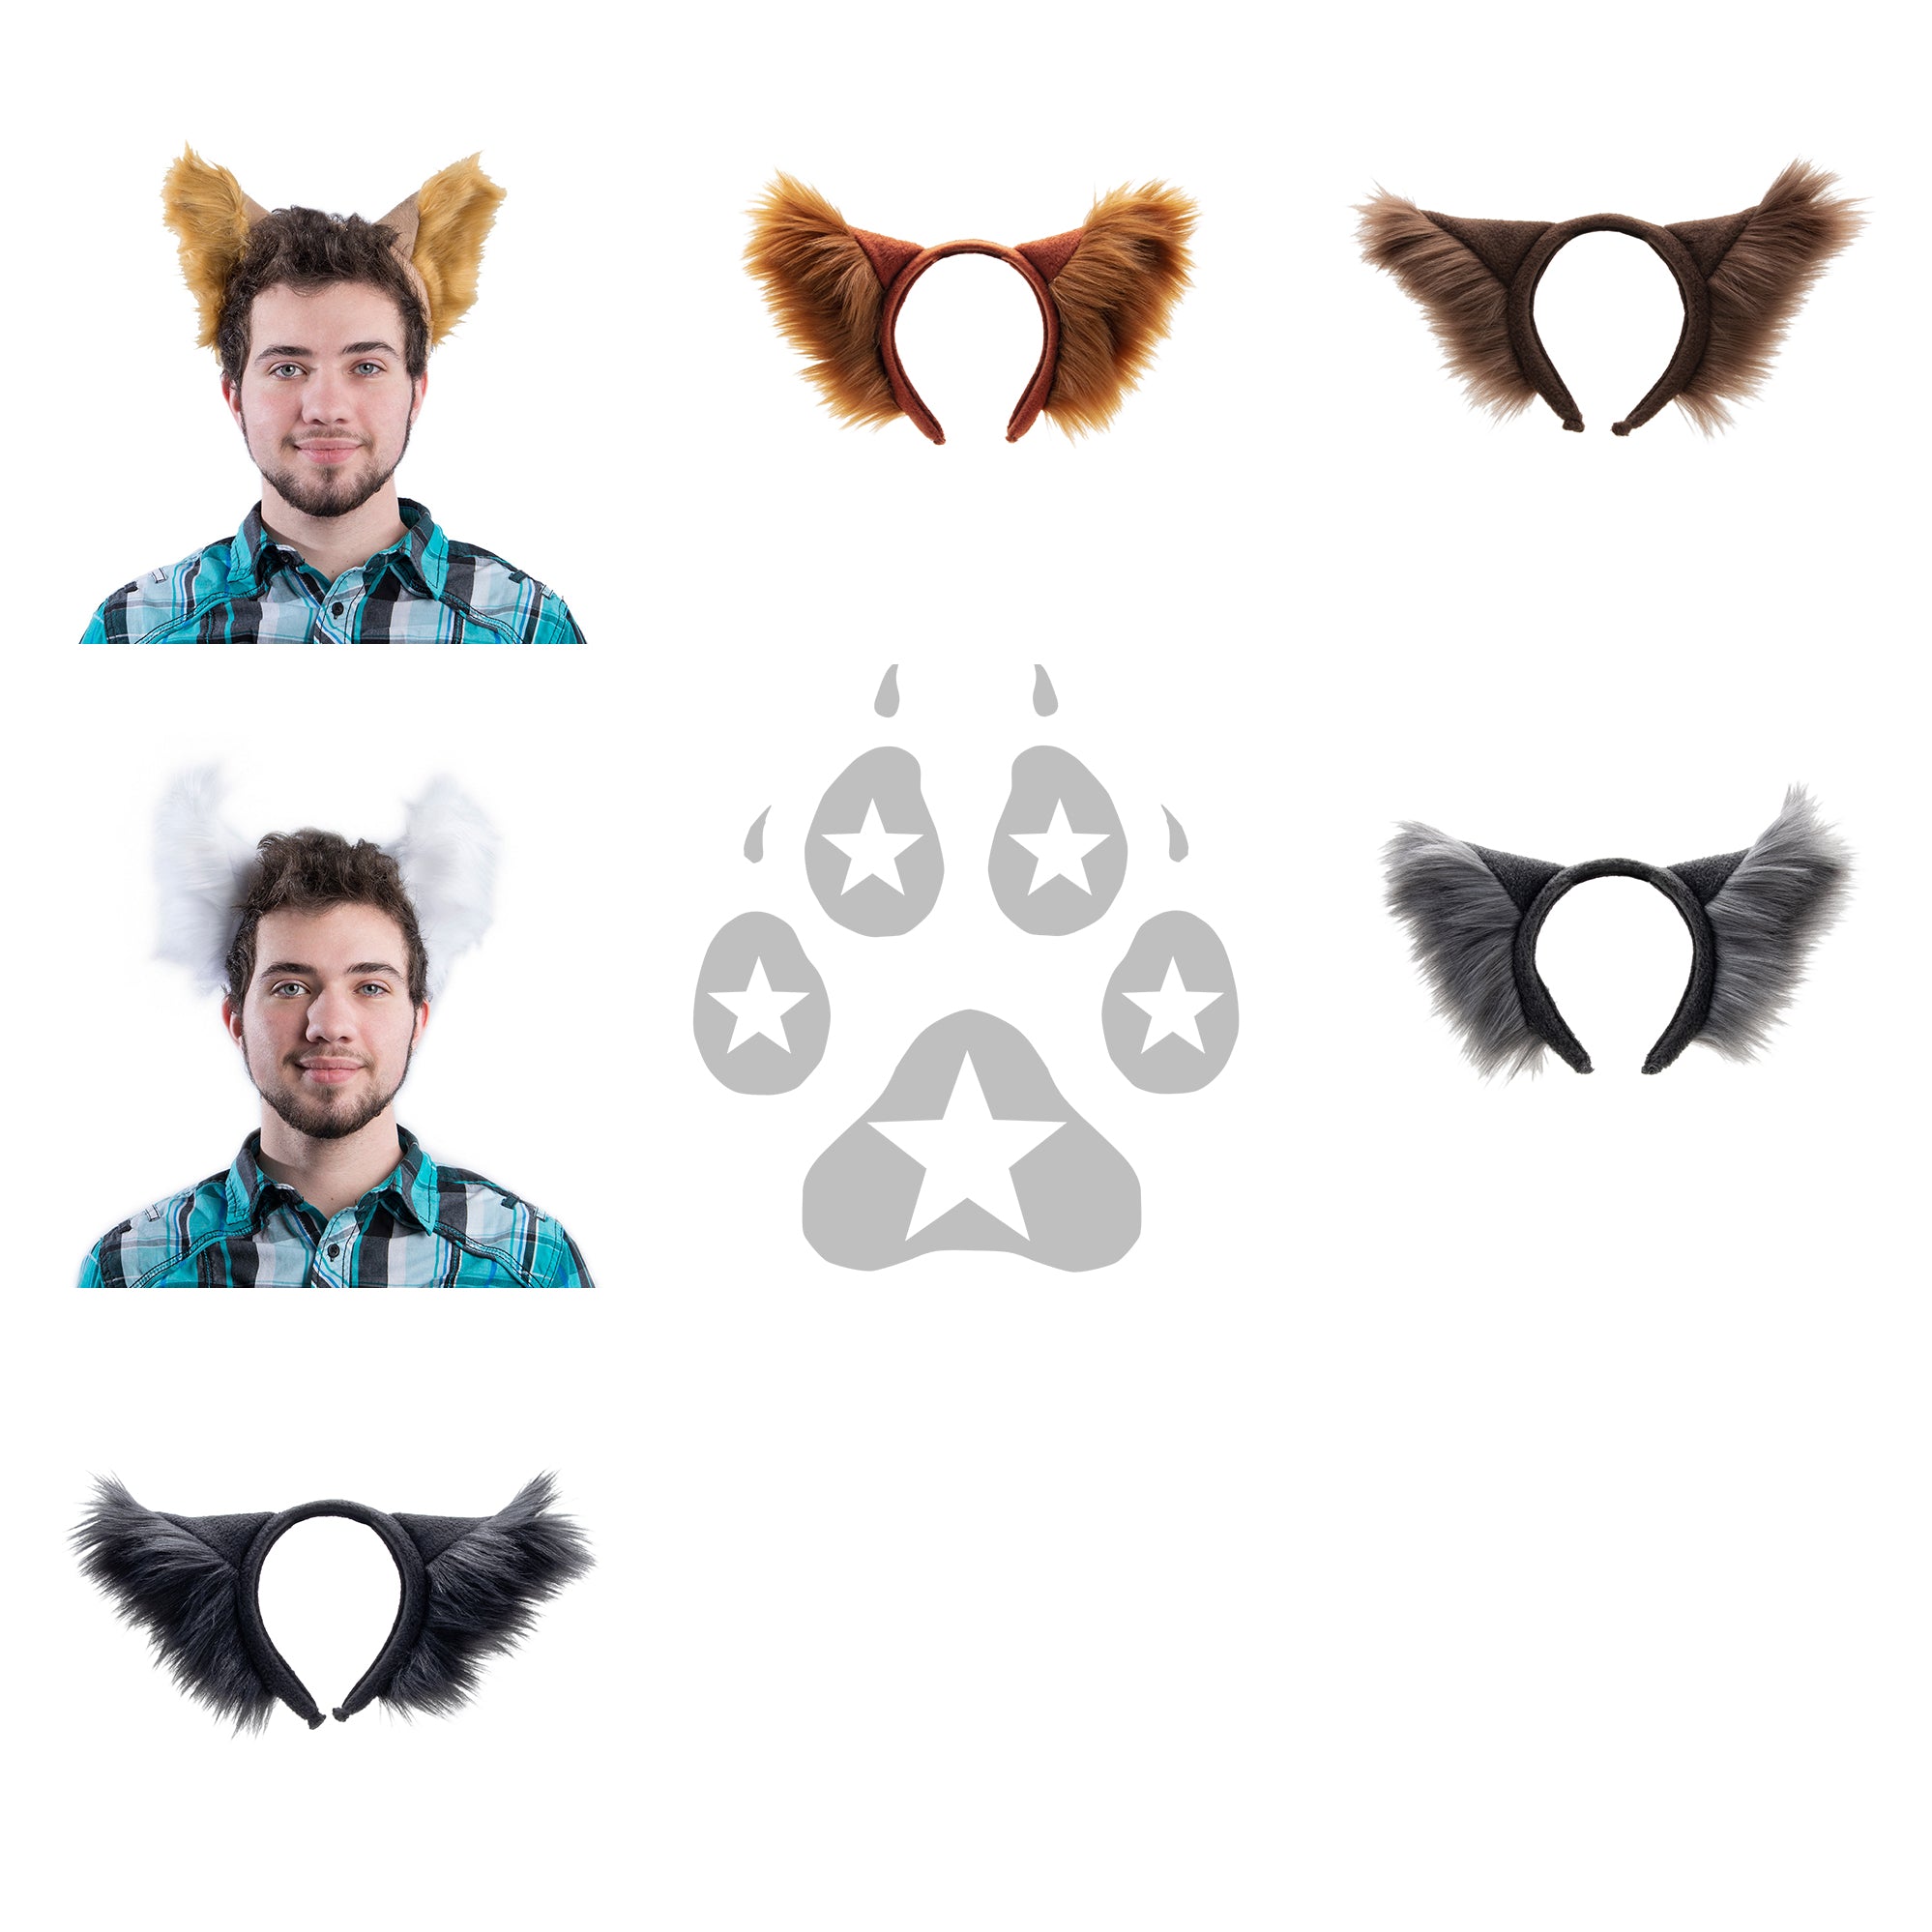  Pawstar furry wold ear headband for costumes cosplay and furry.